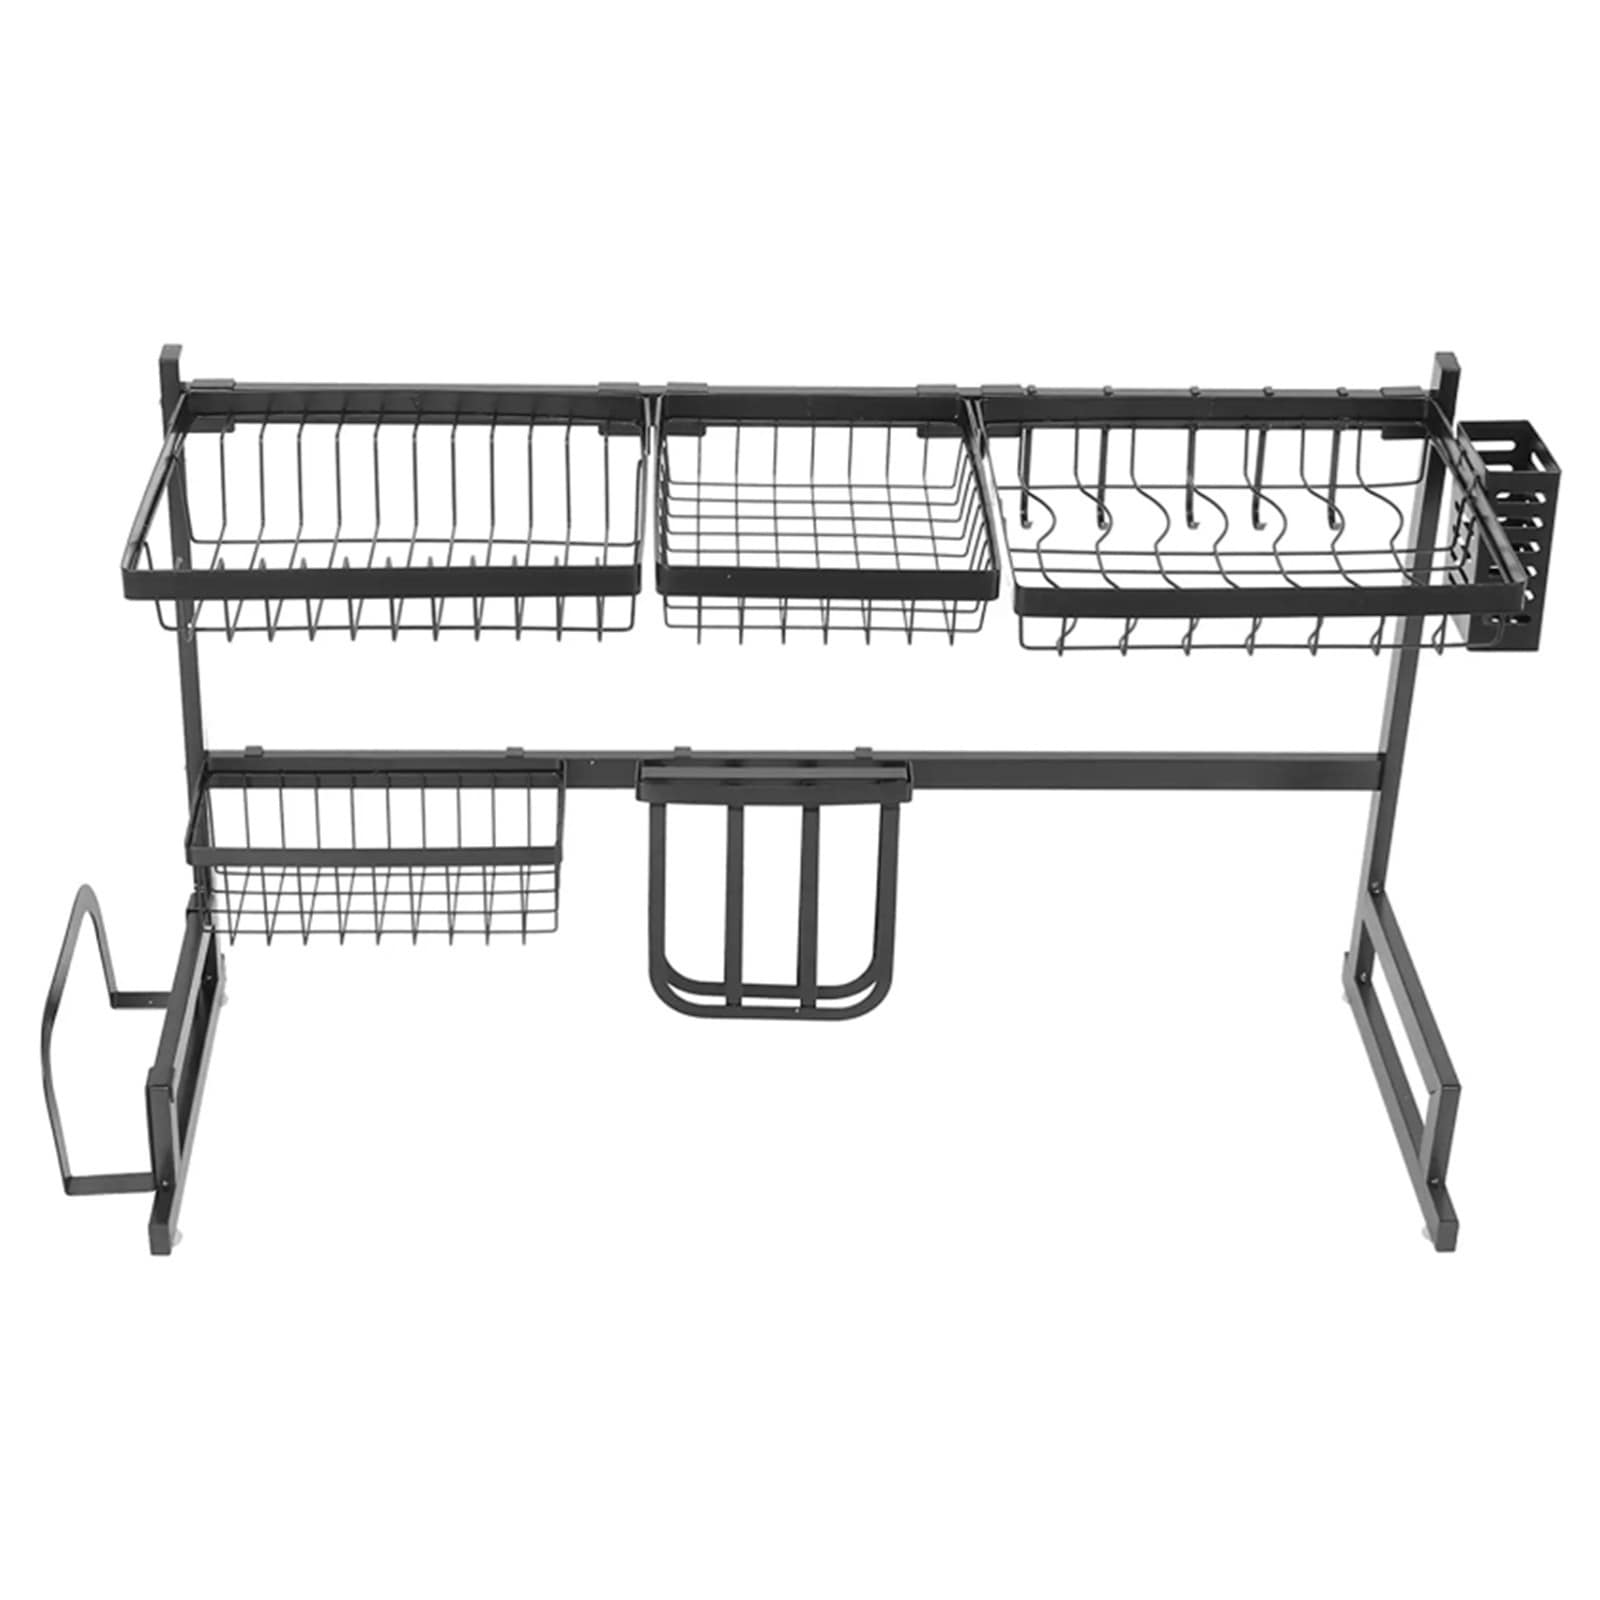 https://ak1.ostkcdn.com/images/products/is/images/direct/aaa1103ef245202cd55c2462cdd7d6c8459a5fc6/Kitchen-Sink-Organizer-Storage-Rack-For-Organizer-Home-Kitchen-Counter-Space-Saver.jpg